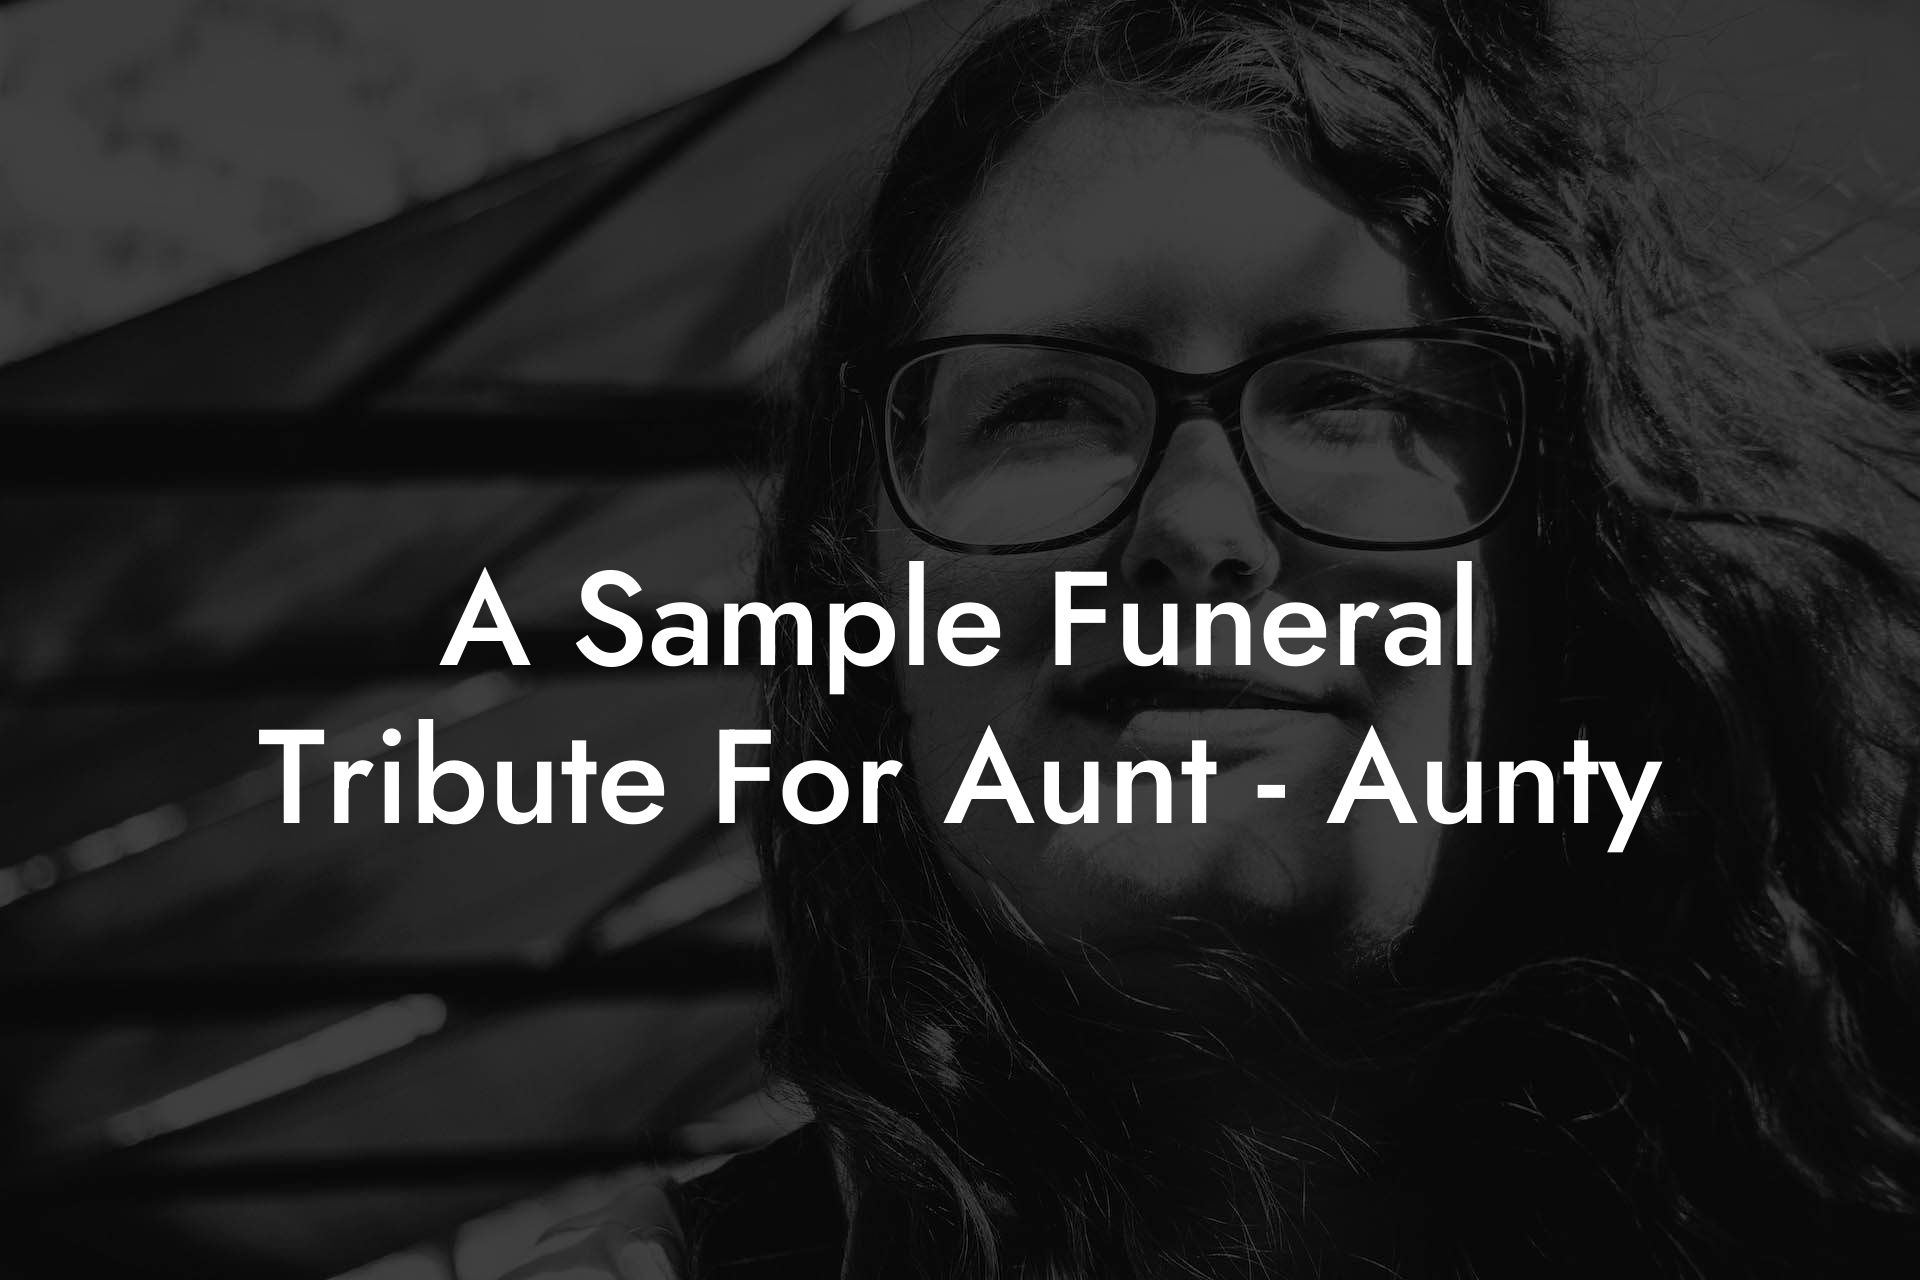 A Sample Funeral Tribute For Aunt - Aunty